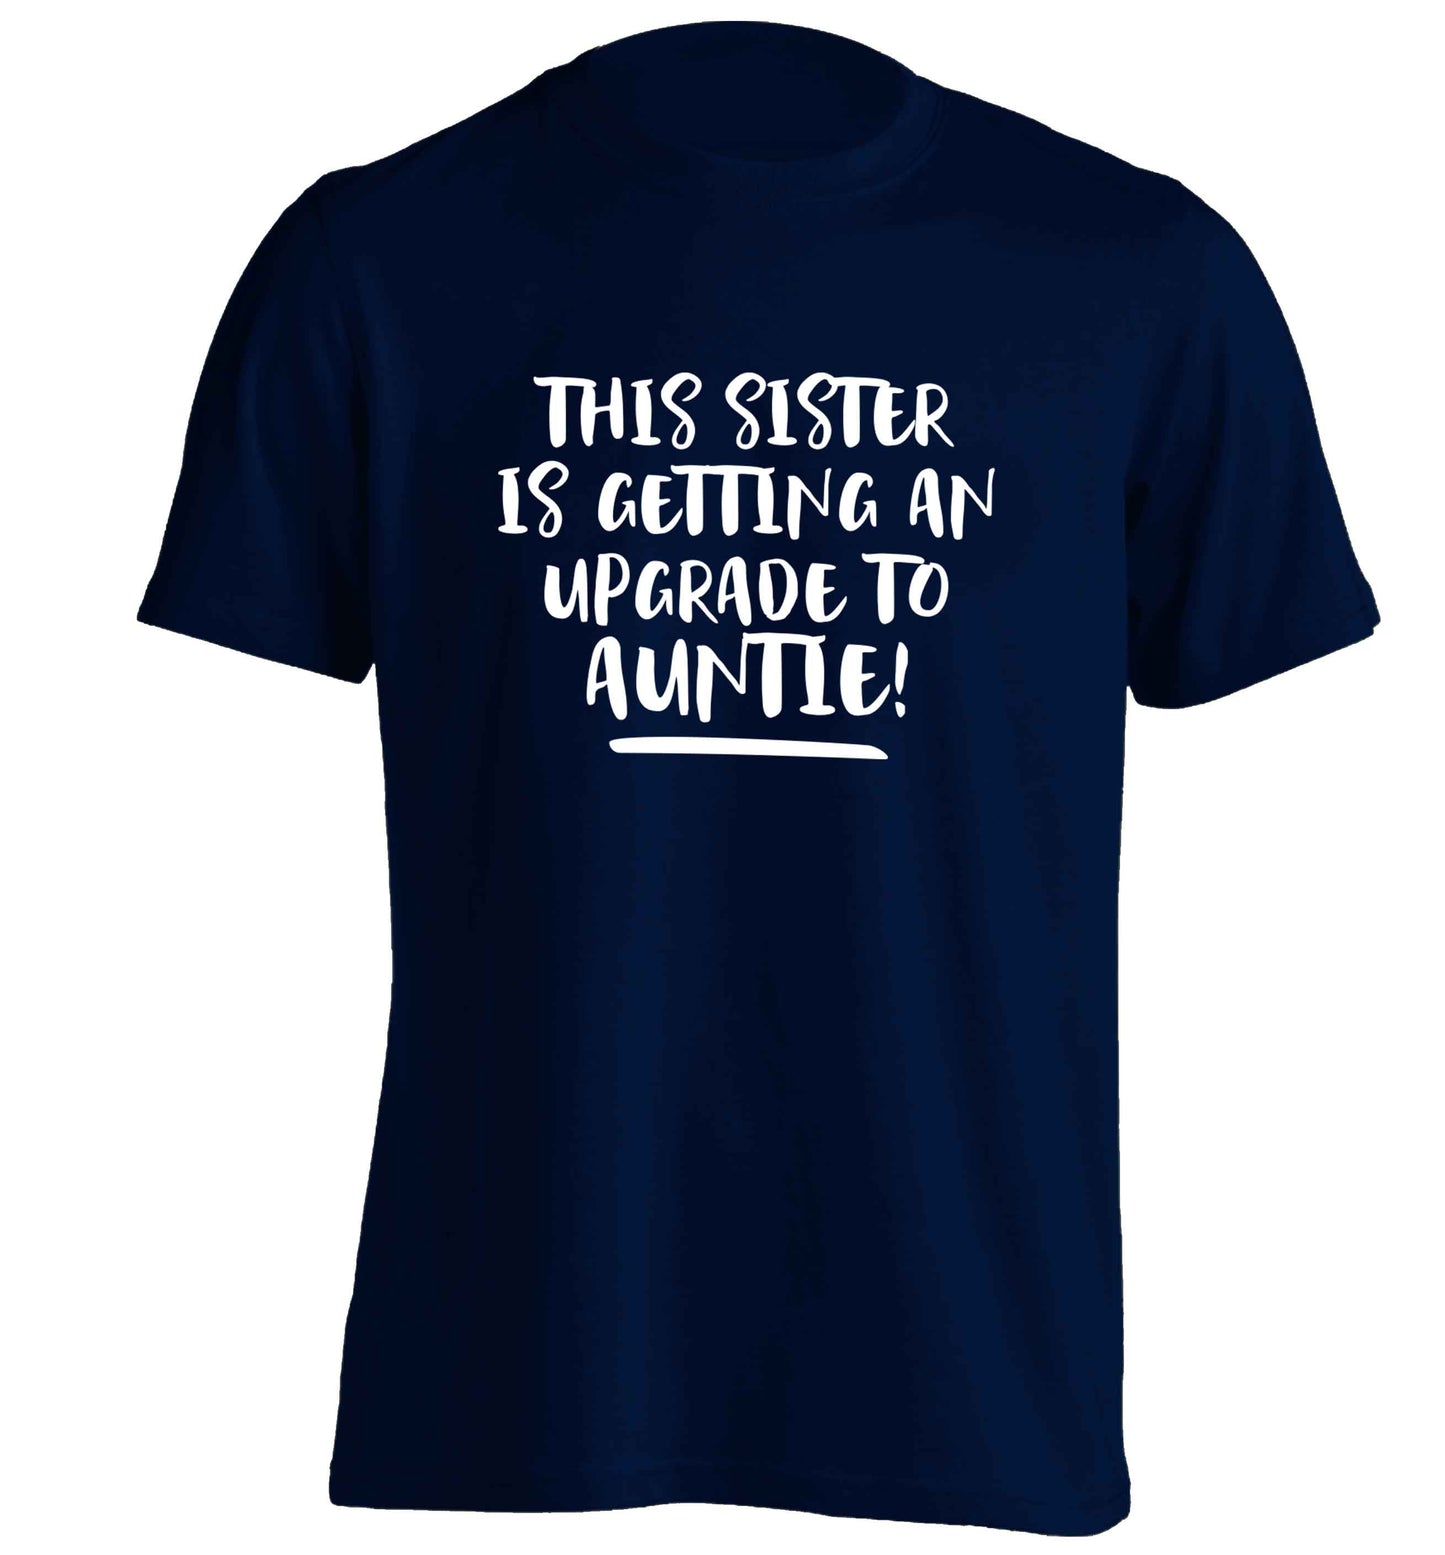 This sister is getting an upgrade to auntie! adults unisex navy Tshirt 2XL